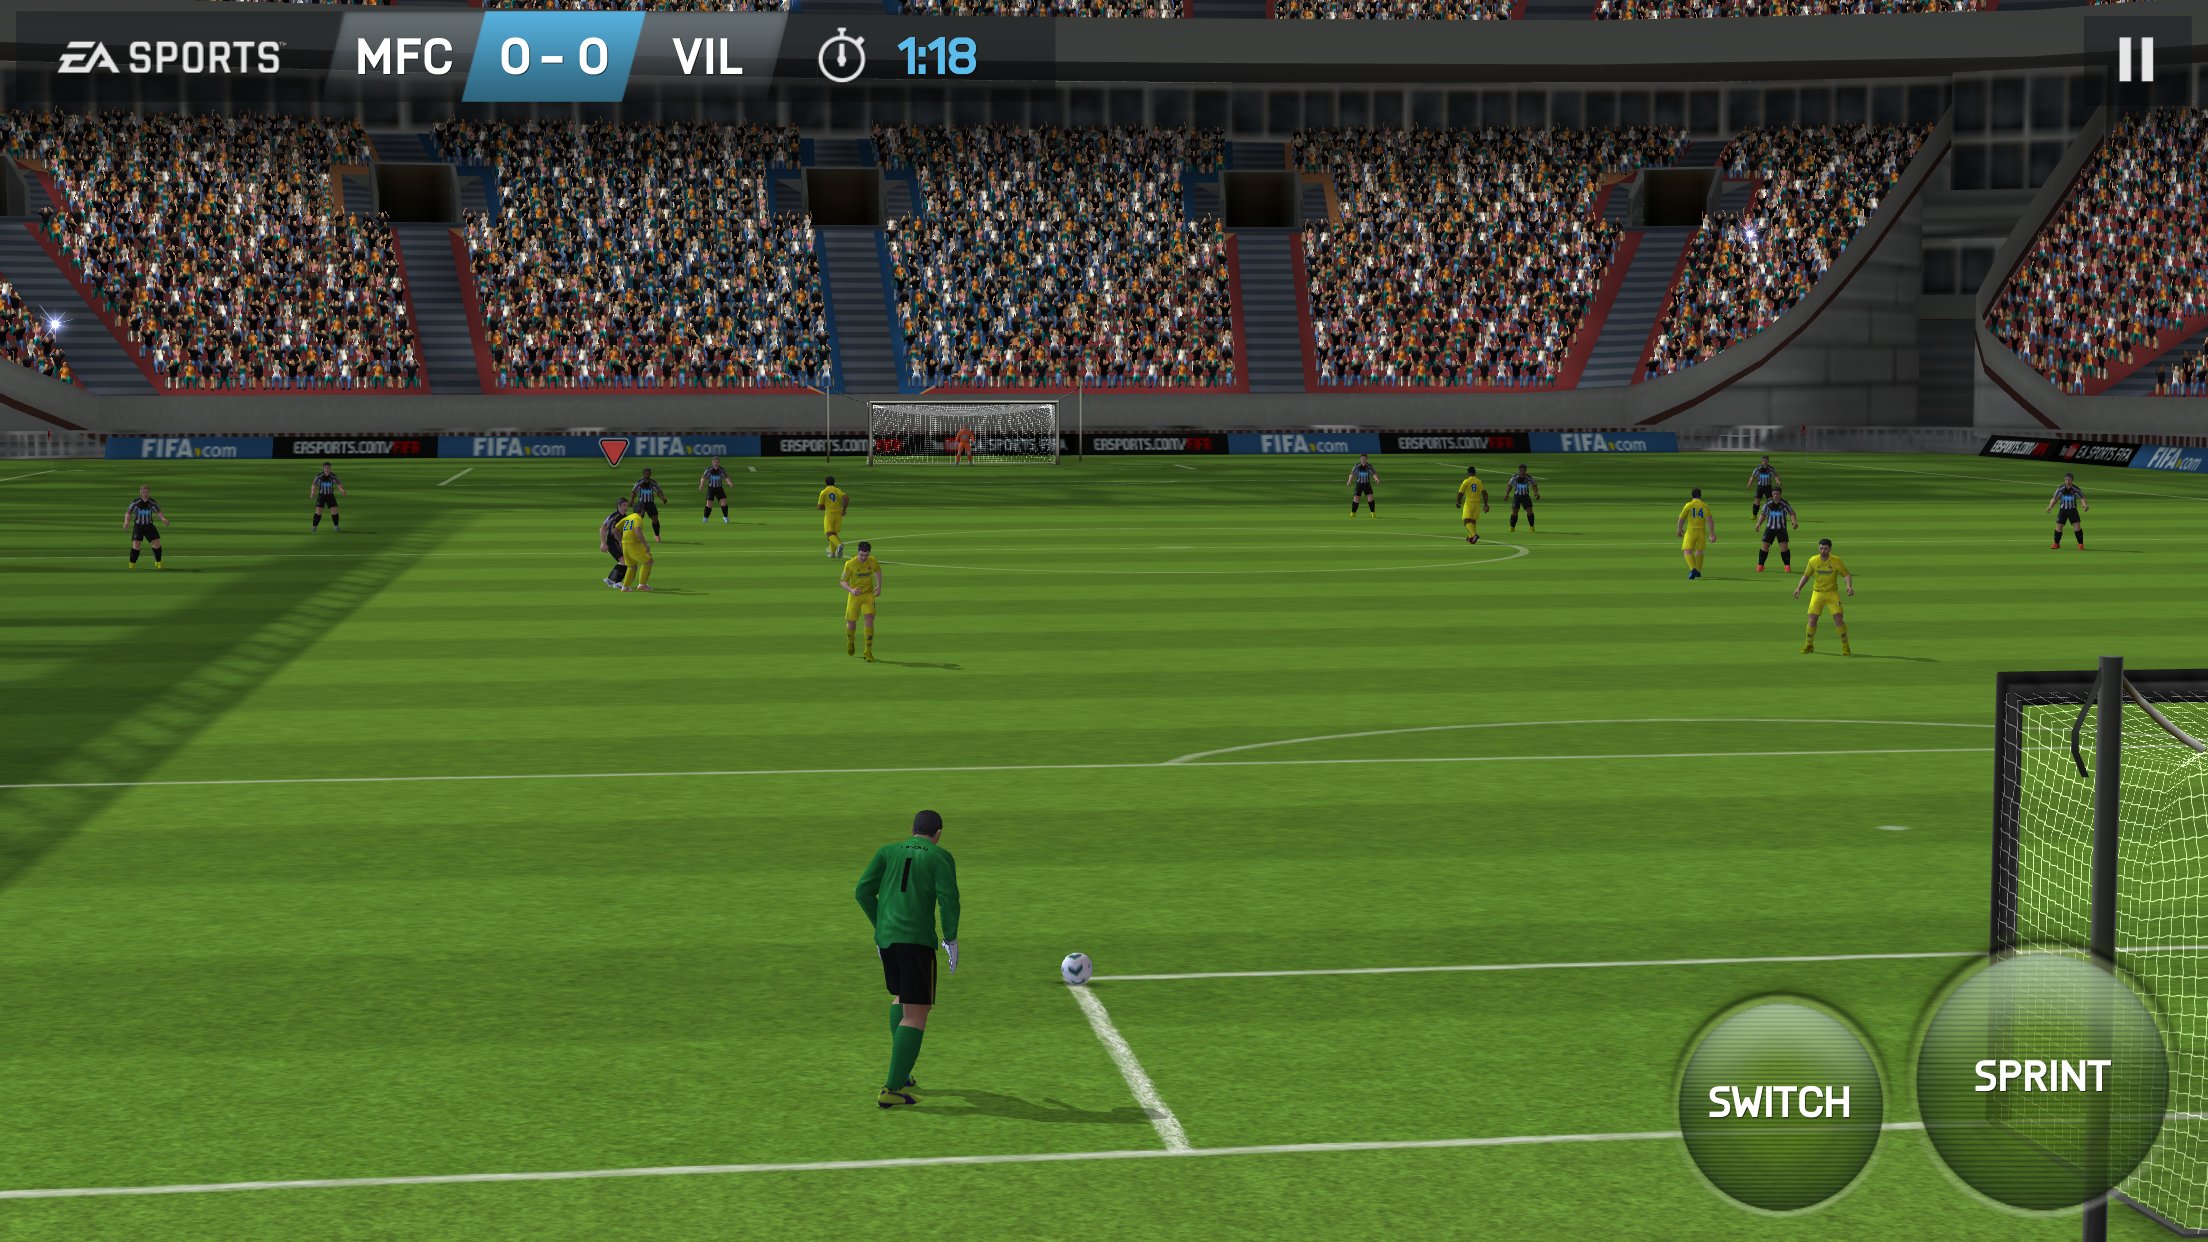 EA Mobile - Who's playing FIFA 15 Ultimate Team on mobile right now? If  not, what are you waiting for, it's FREE to play on the App Store, Google  Play and Windows